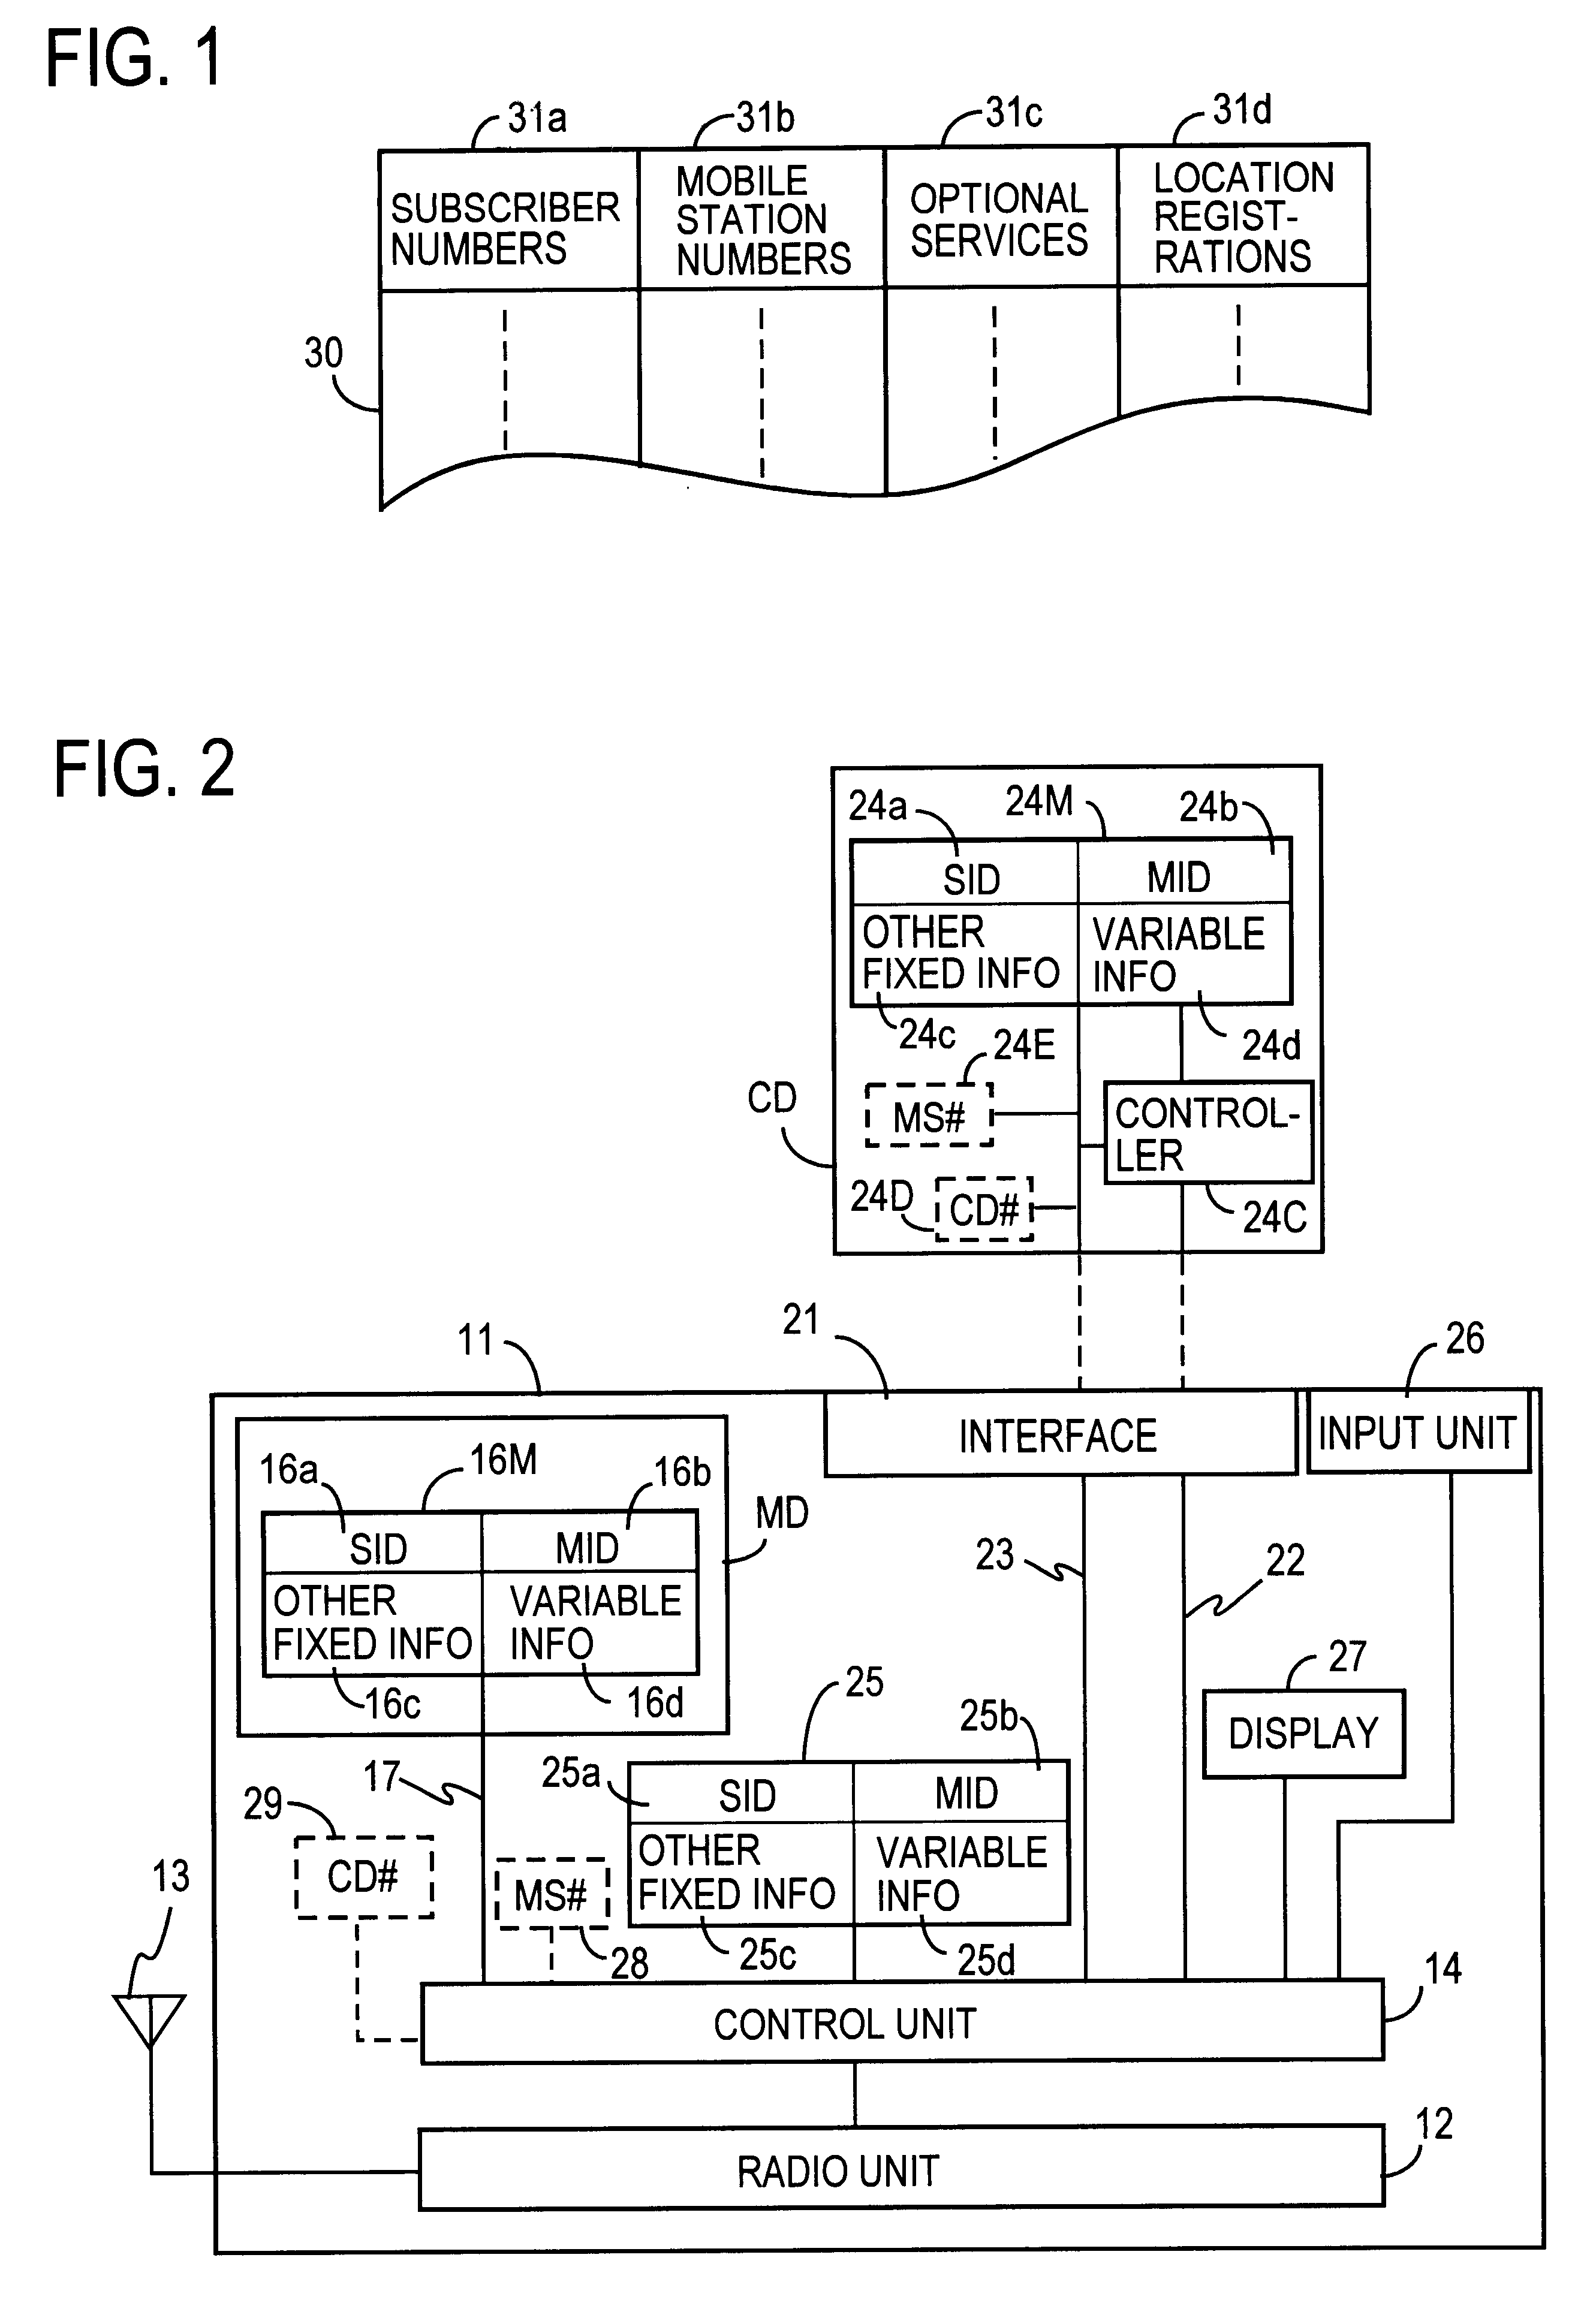 Method for controlling activation of mobile station, and mobile station using the method